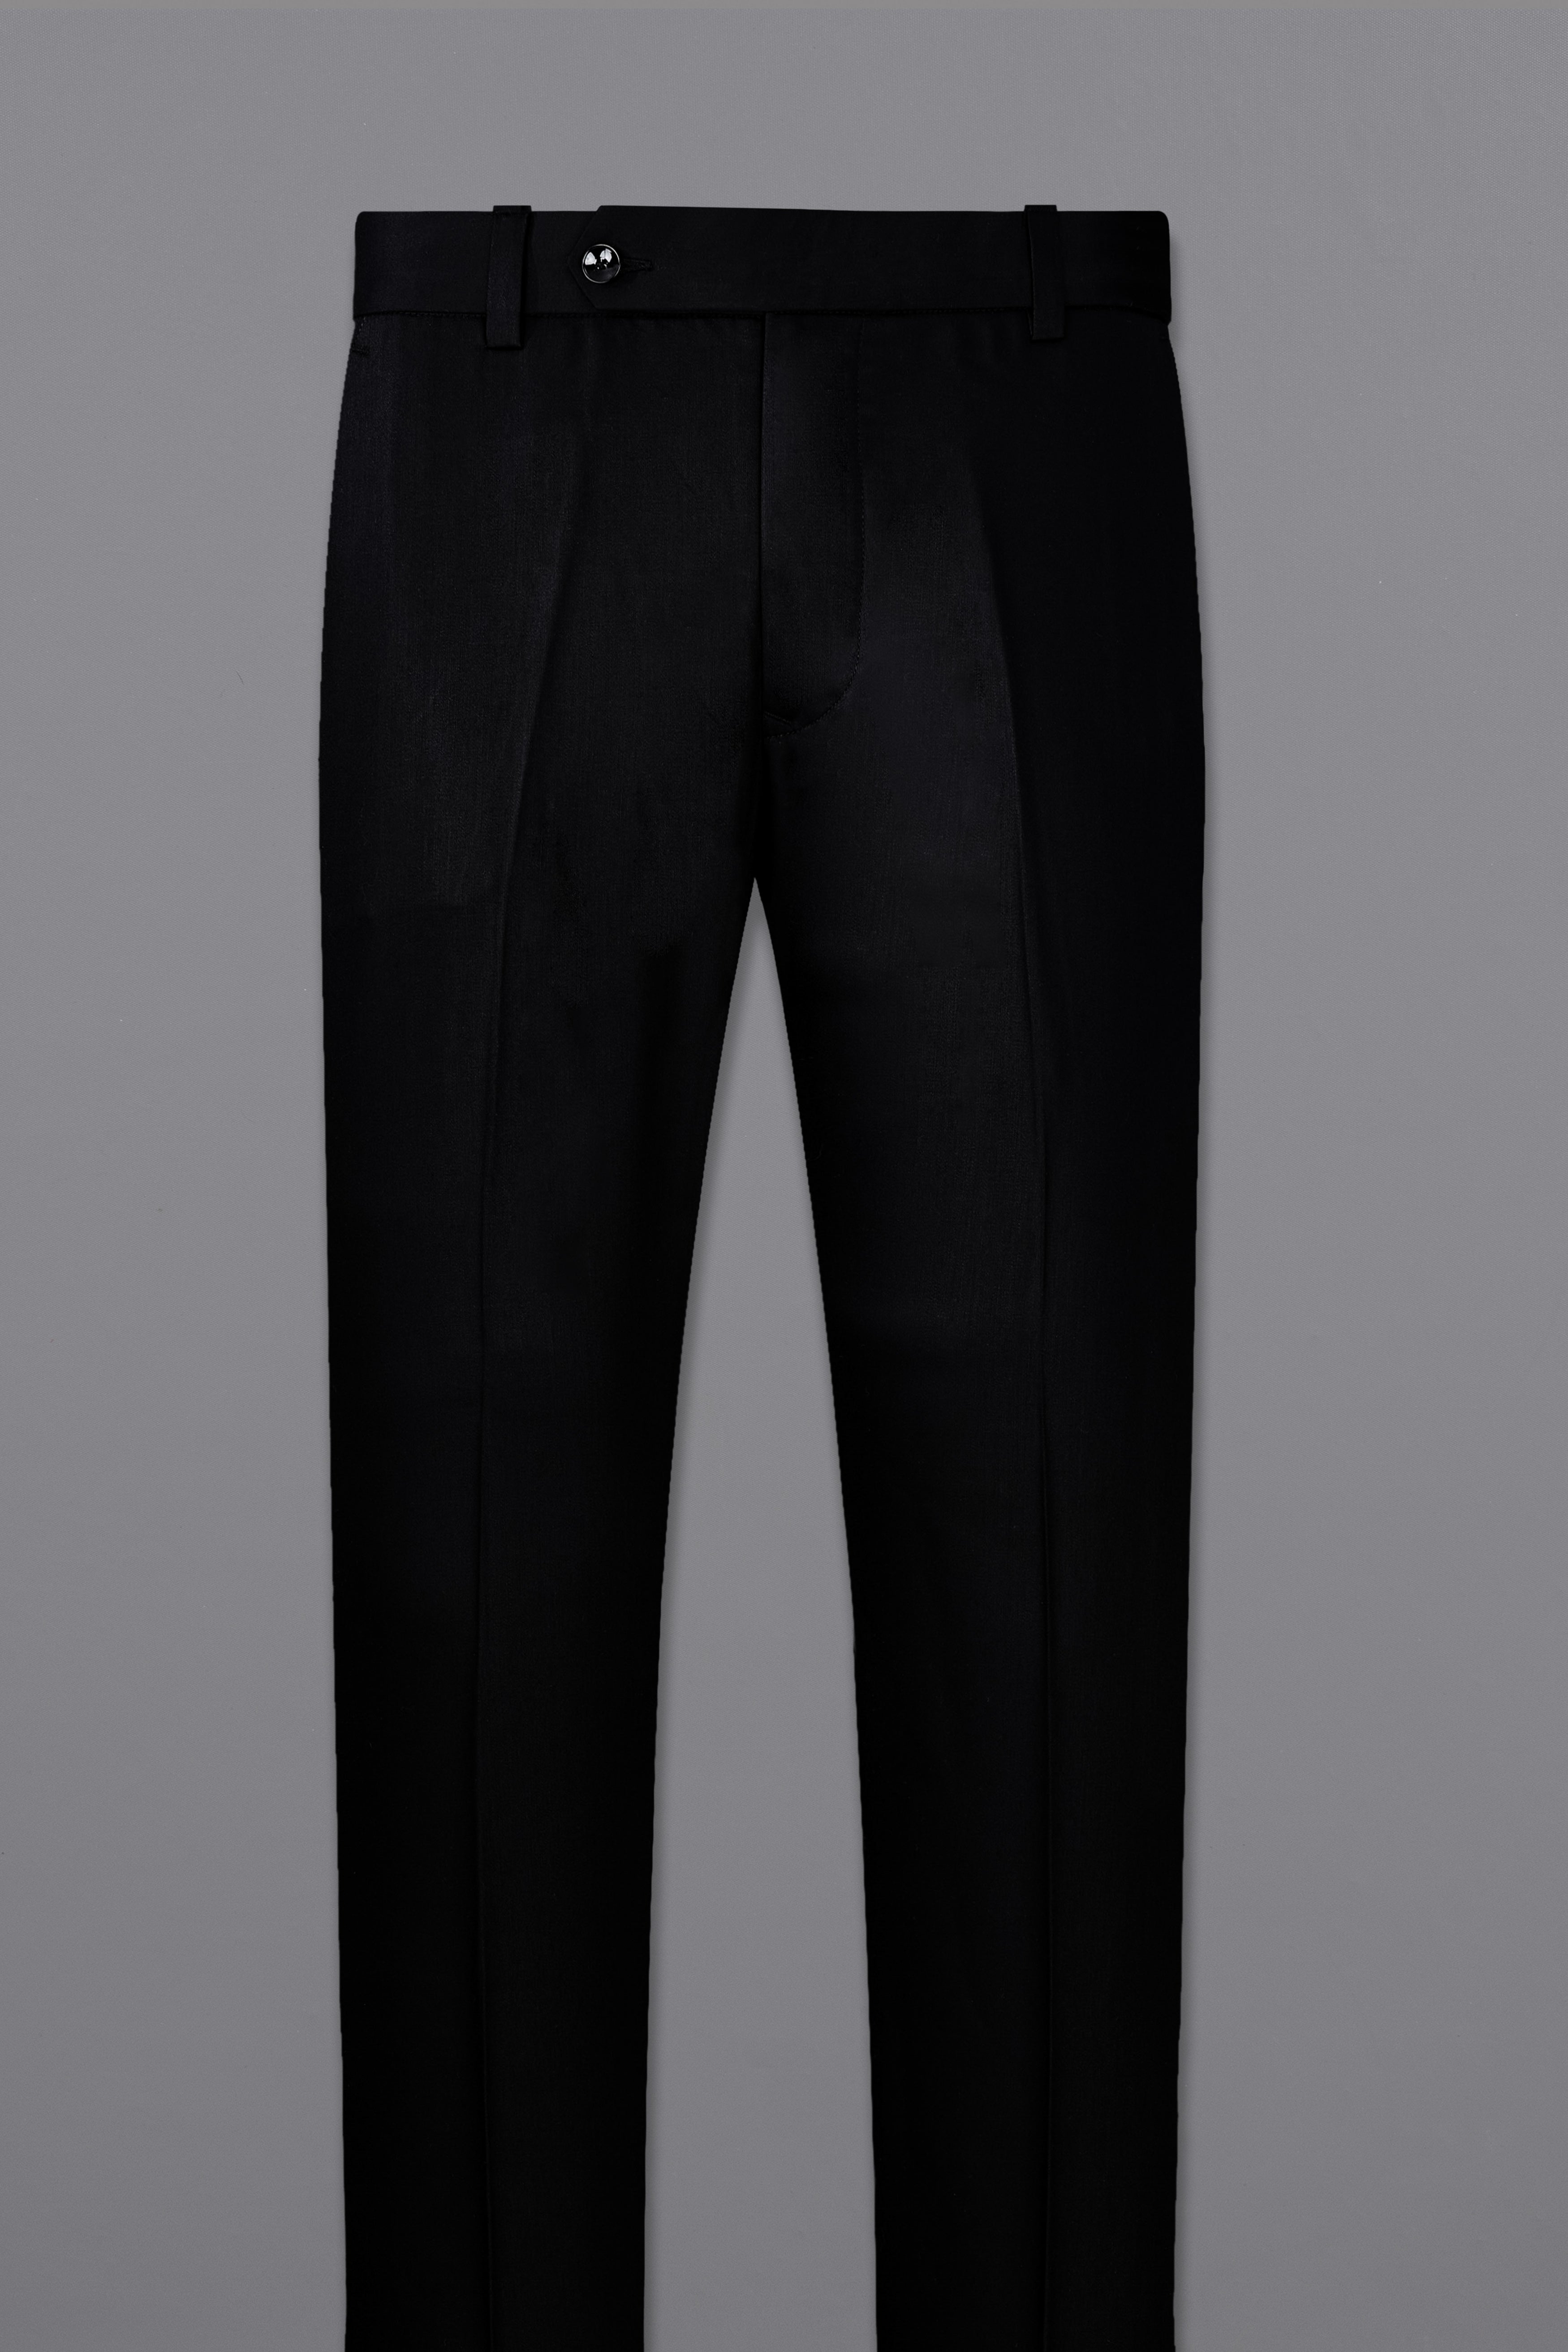 Jade Black Subtle Sheen Double Breasted Suit